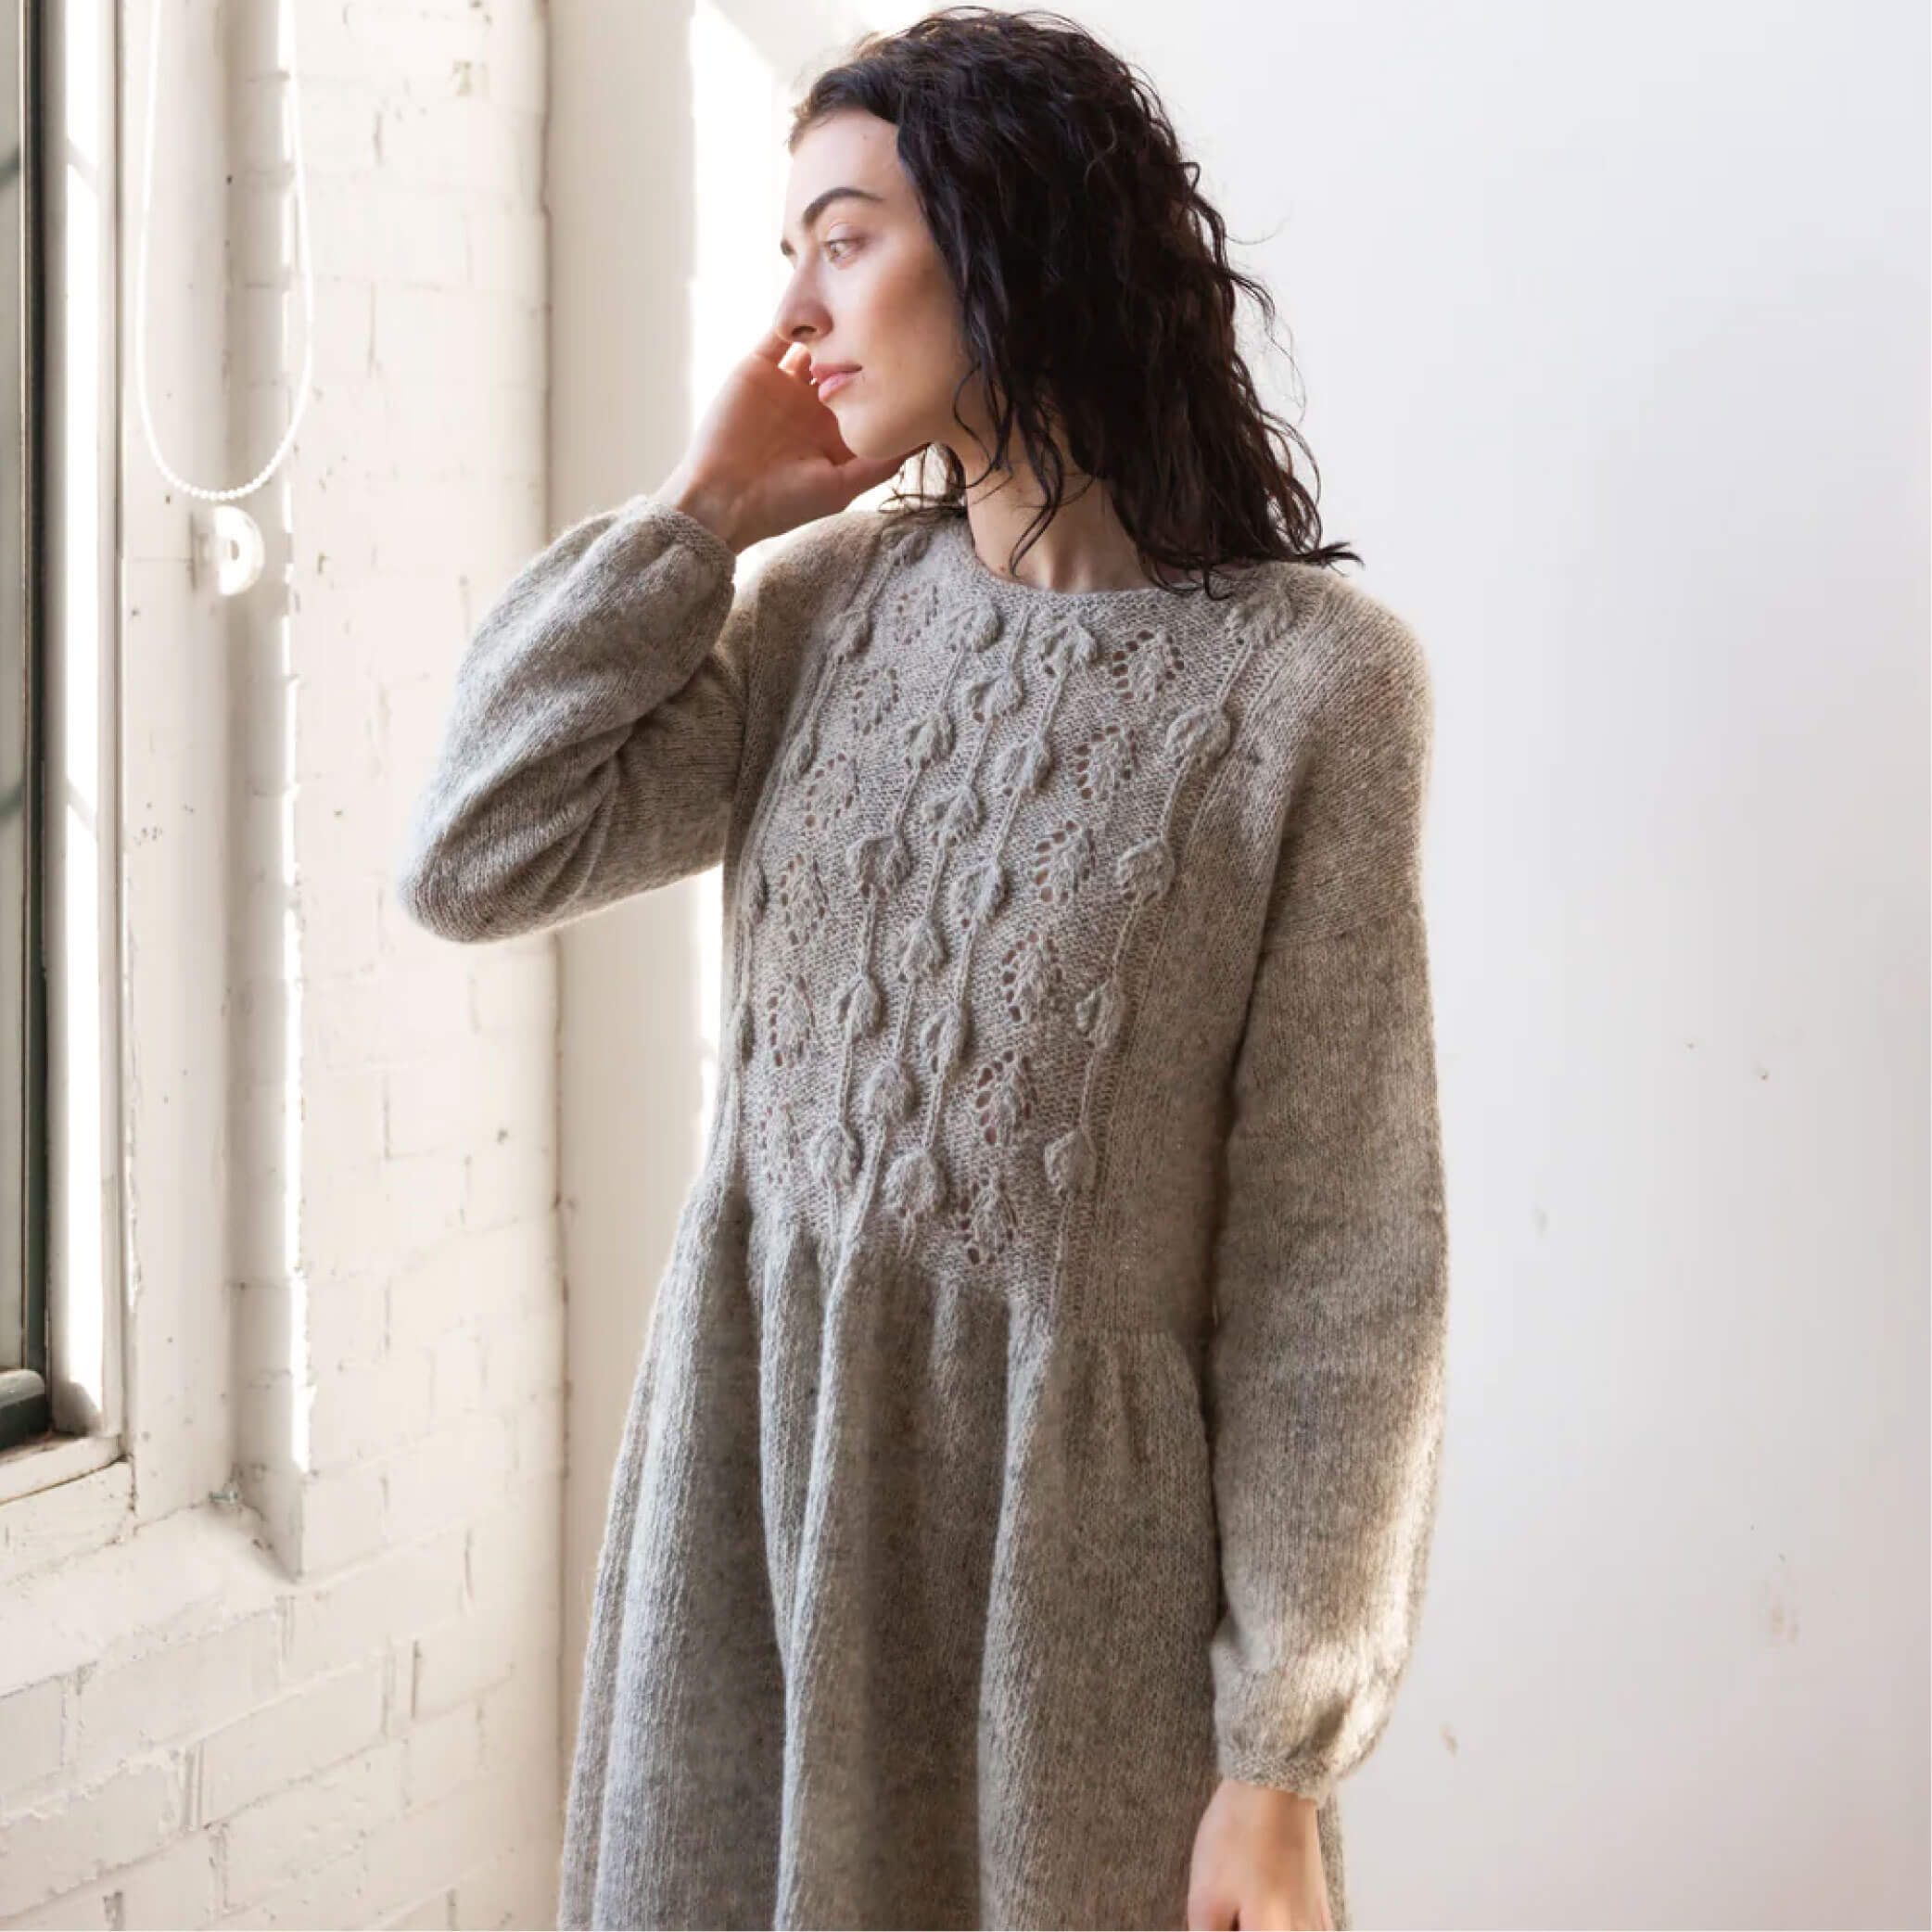 SWEETFERN ニットワンピース レシピ【Owlet】【Quince&Co】【seeknit】【編み図】【パターン】【ニットワンピース】☆レシピ｜syugei｜04